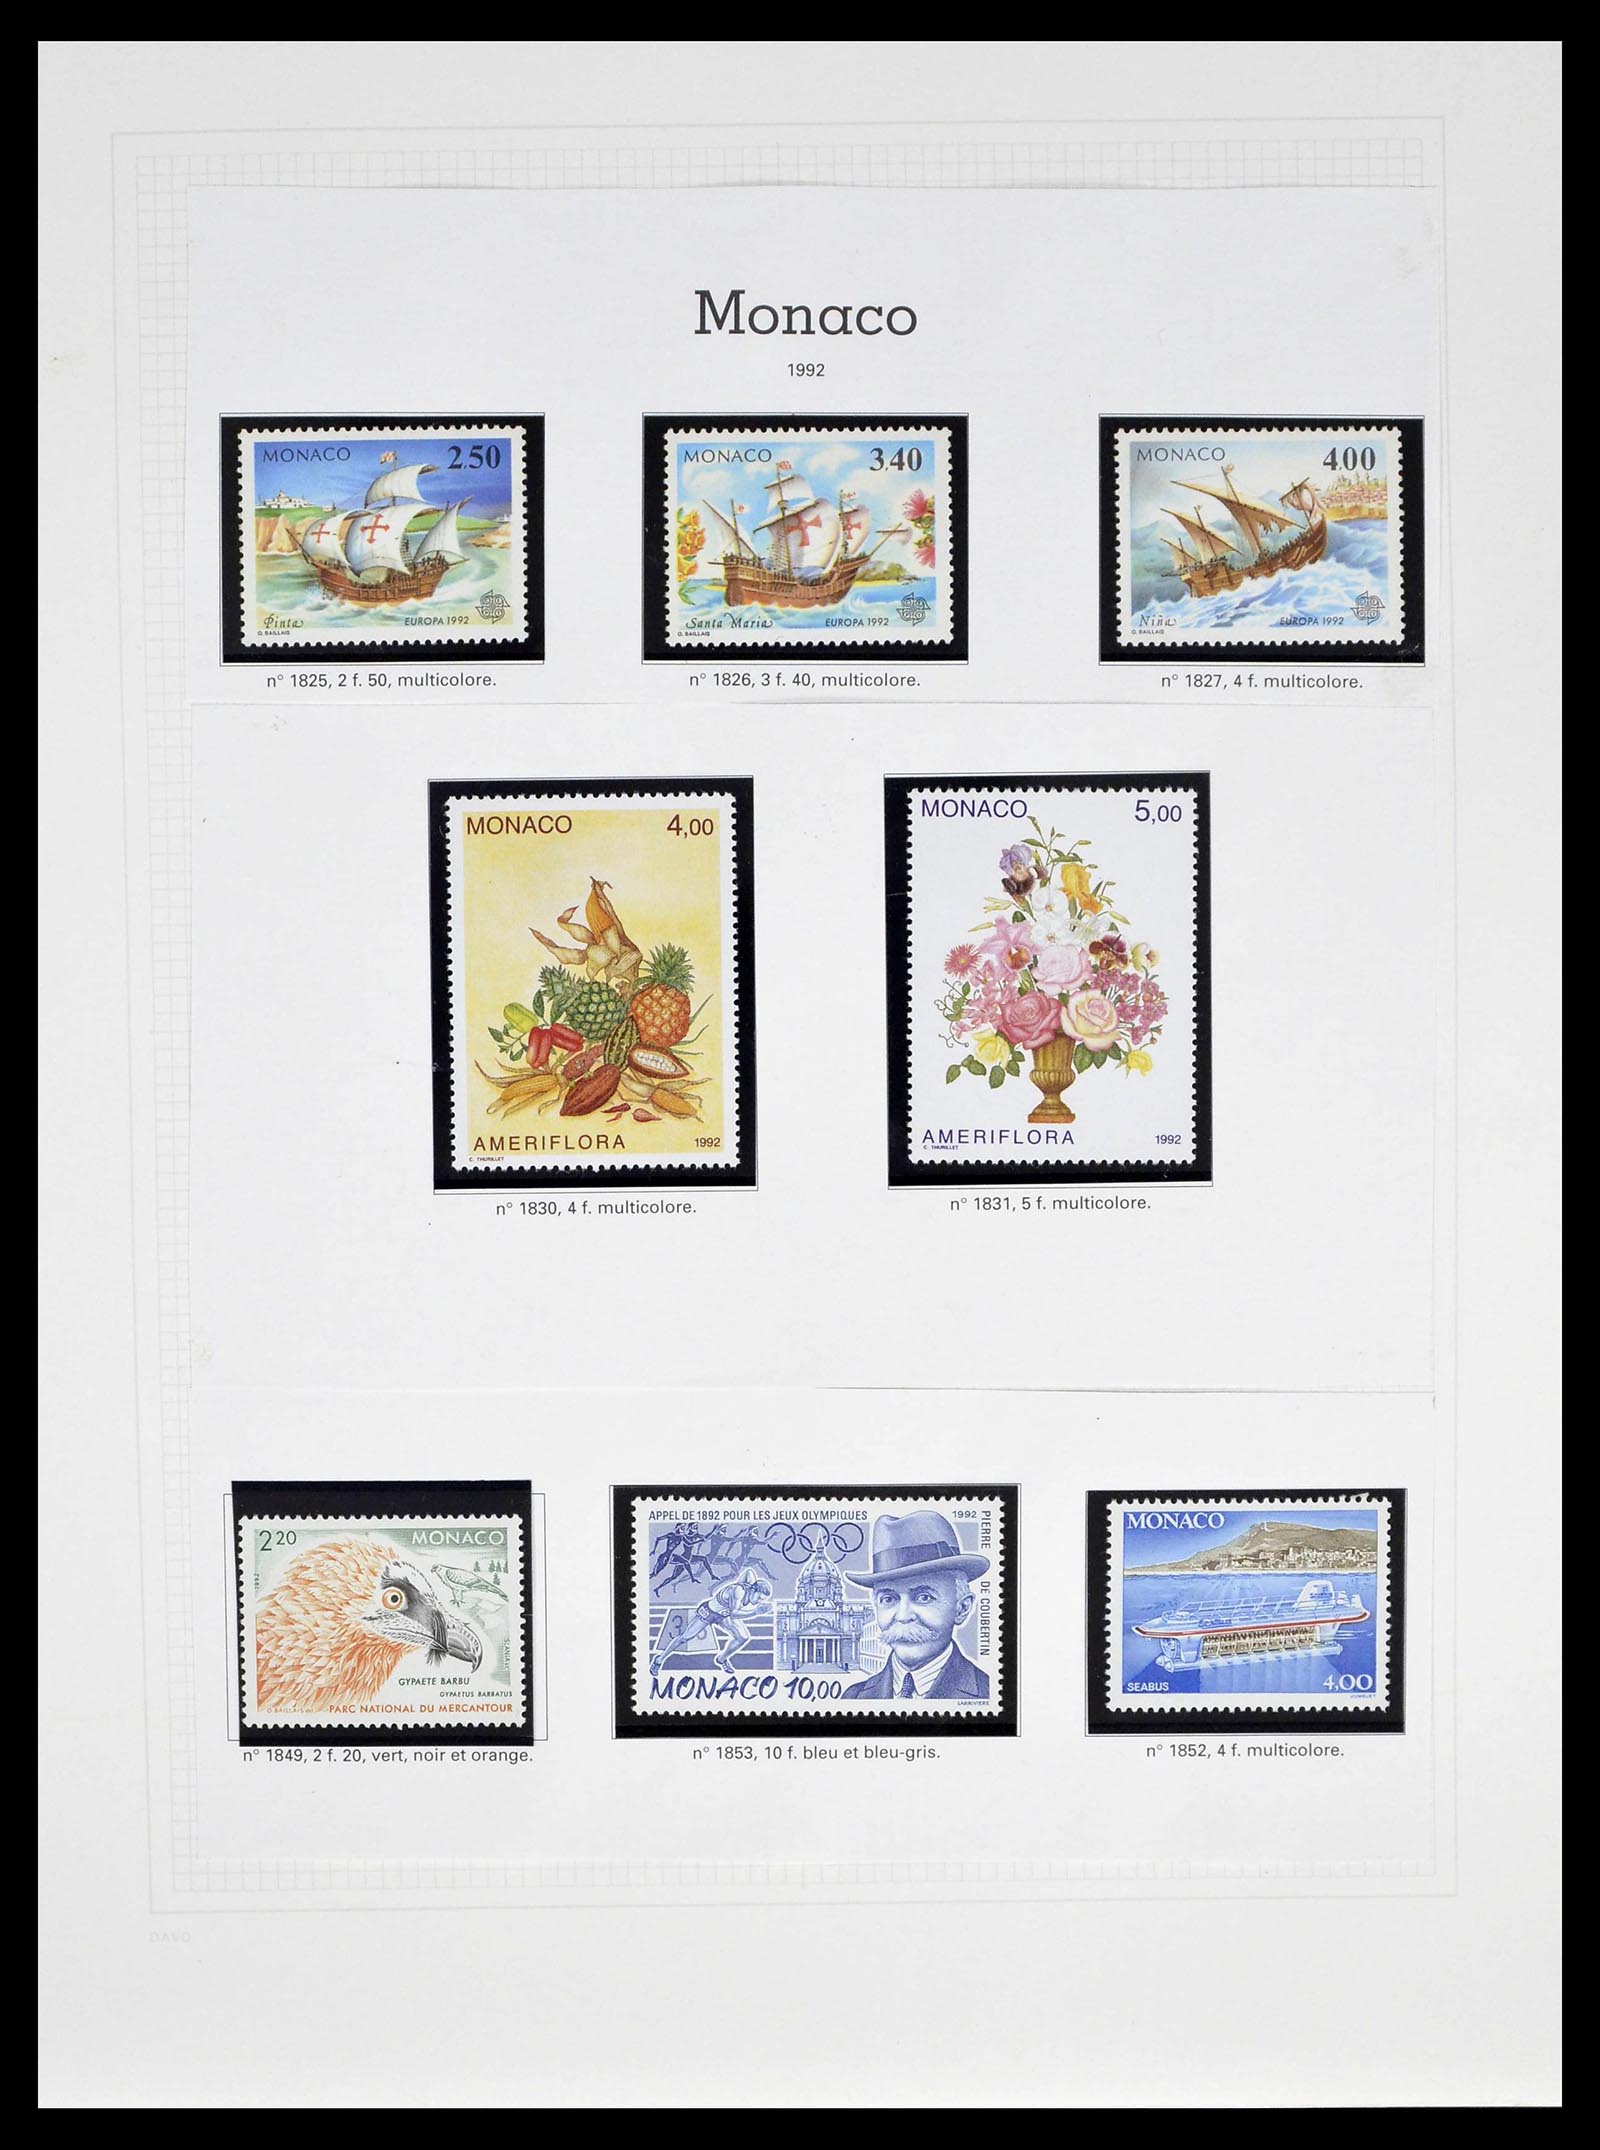 39110 0201 - Stamp collection 39110 Monaco complete 1885-1994.